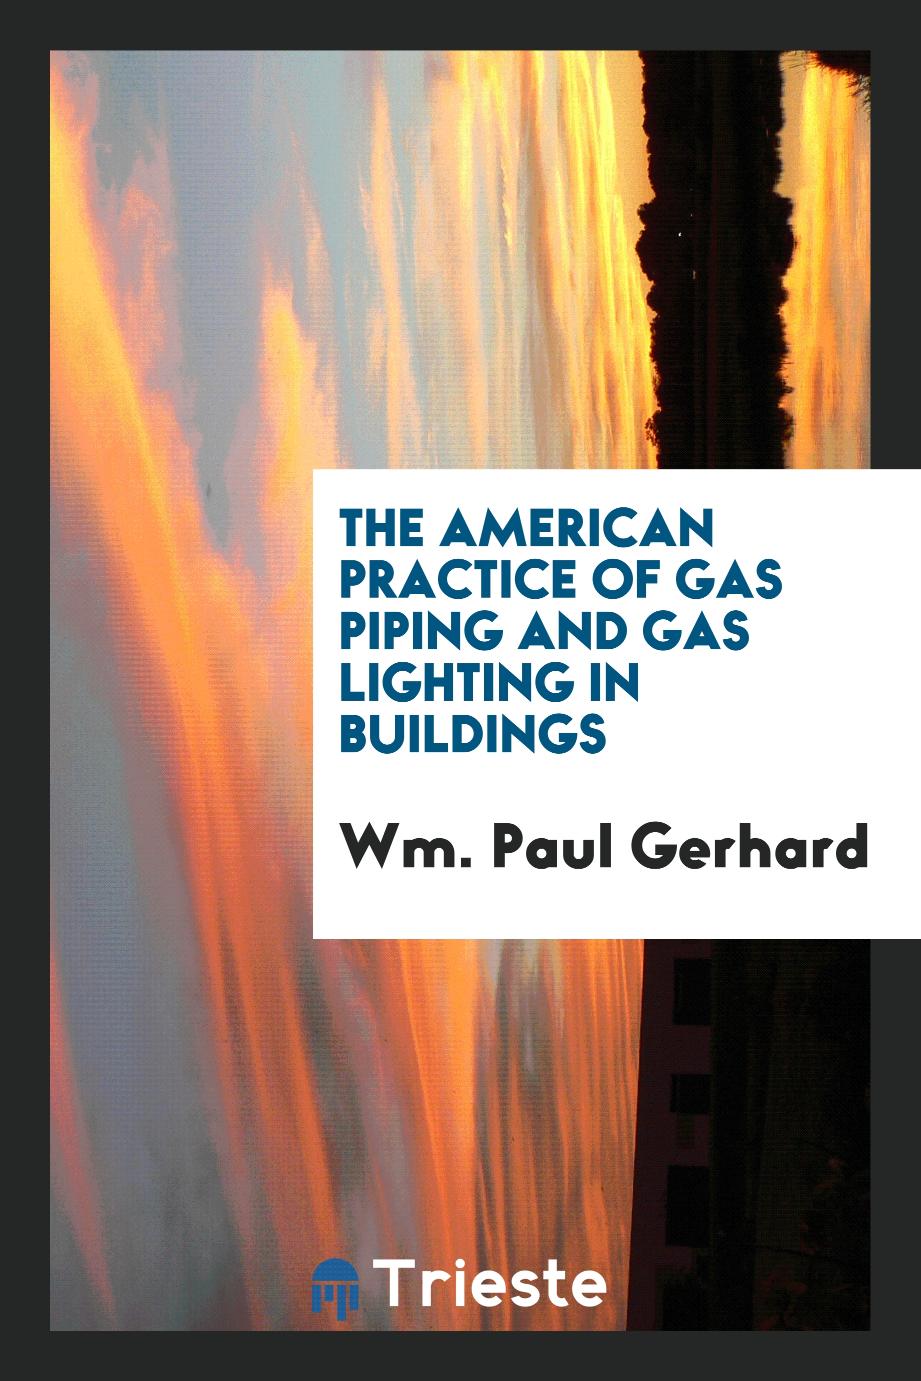 The American Practice of Gas Piping and Gas Lighting in Buildings